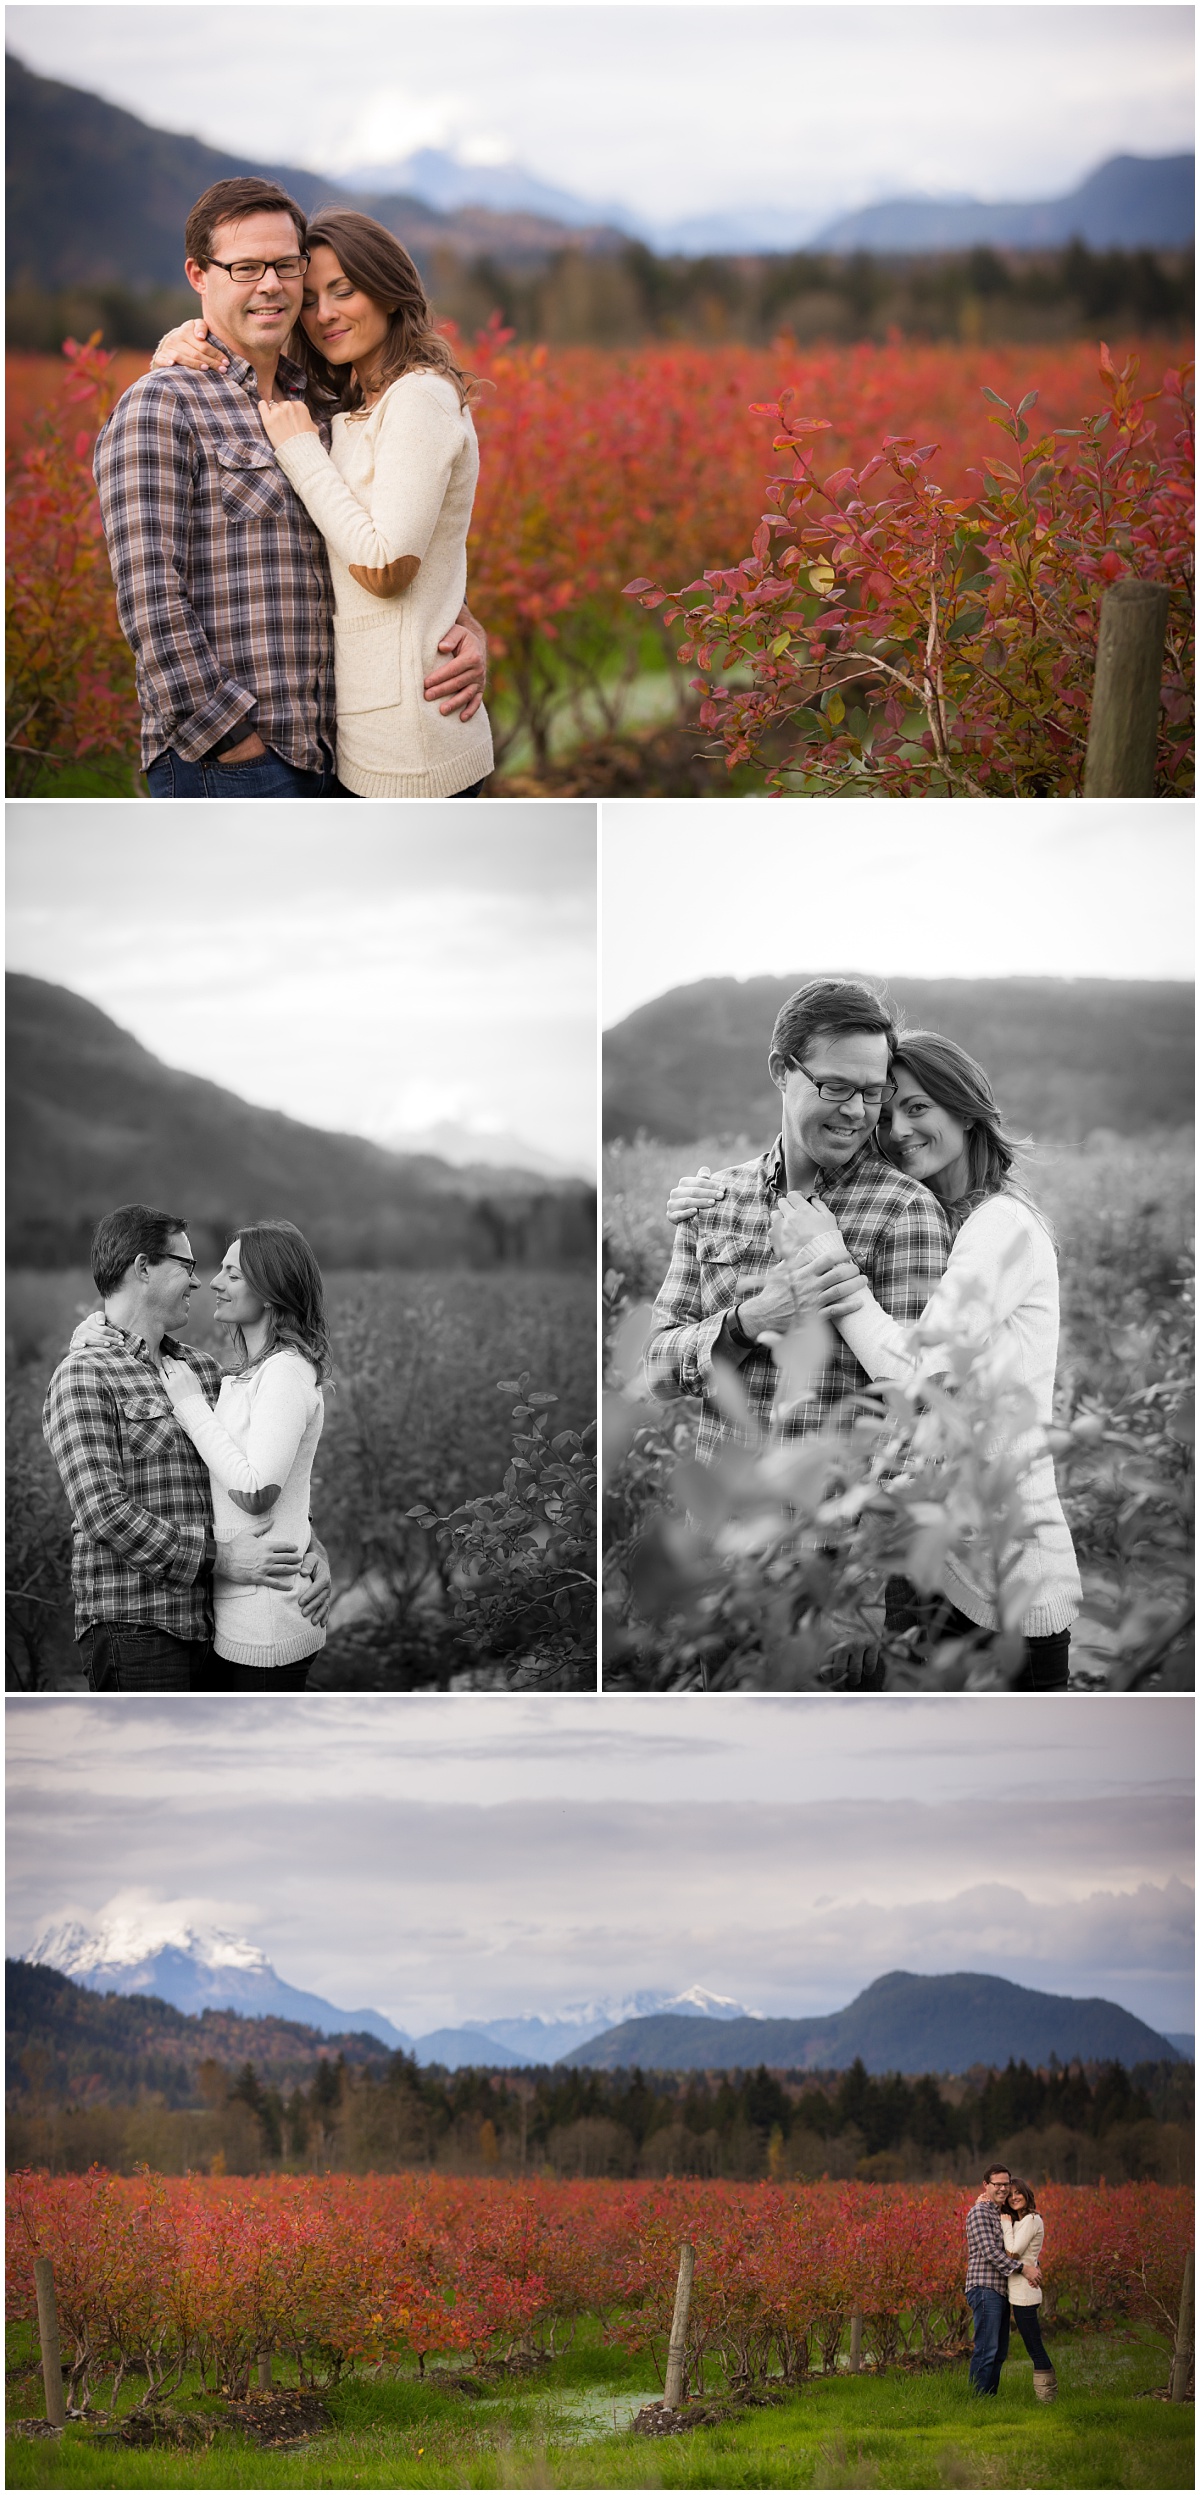 Amazing Day Photography - Mission Engagement Session - Hatzic Lake - Cascade Falls -Blueberry Field - Fall Engagement Session - Fraser Valley Engagement Photographer (15).jpg